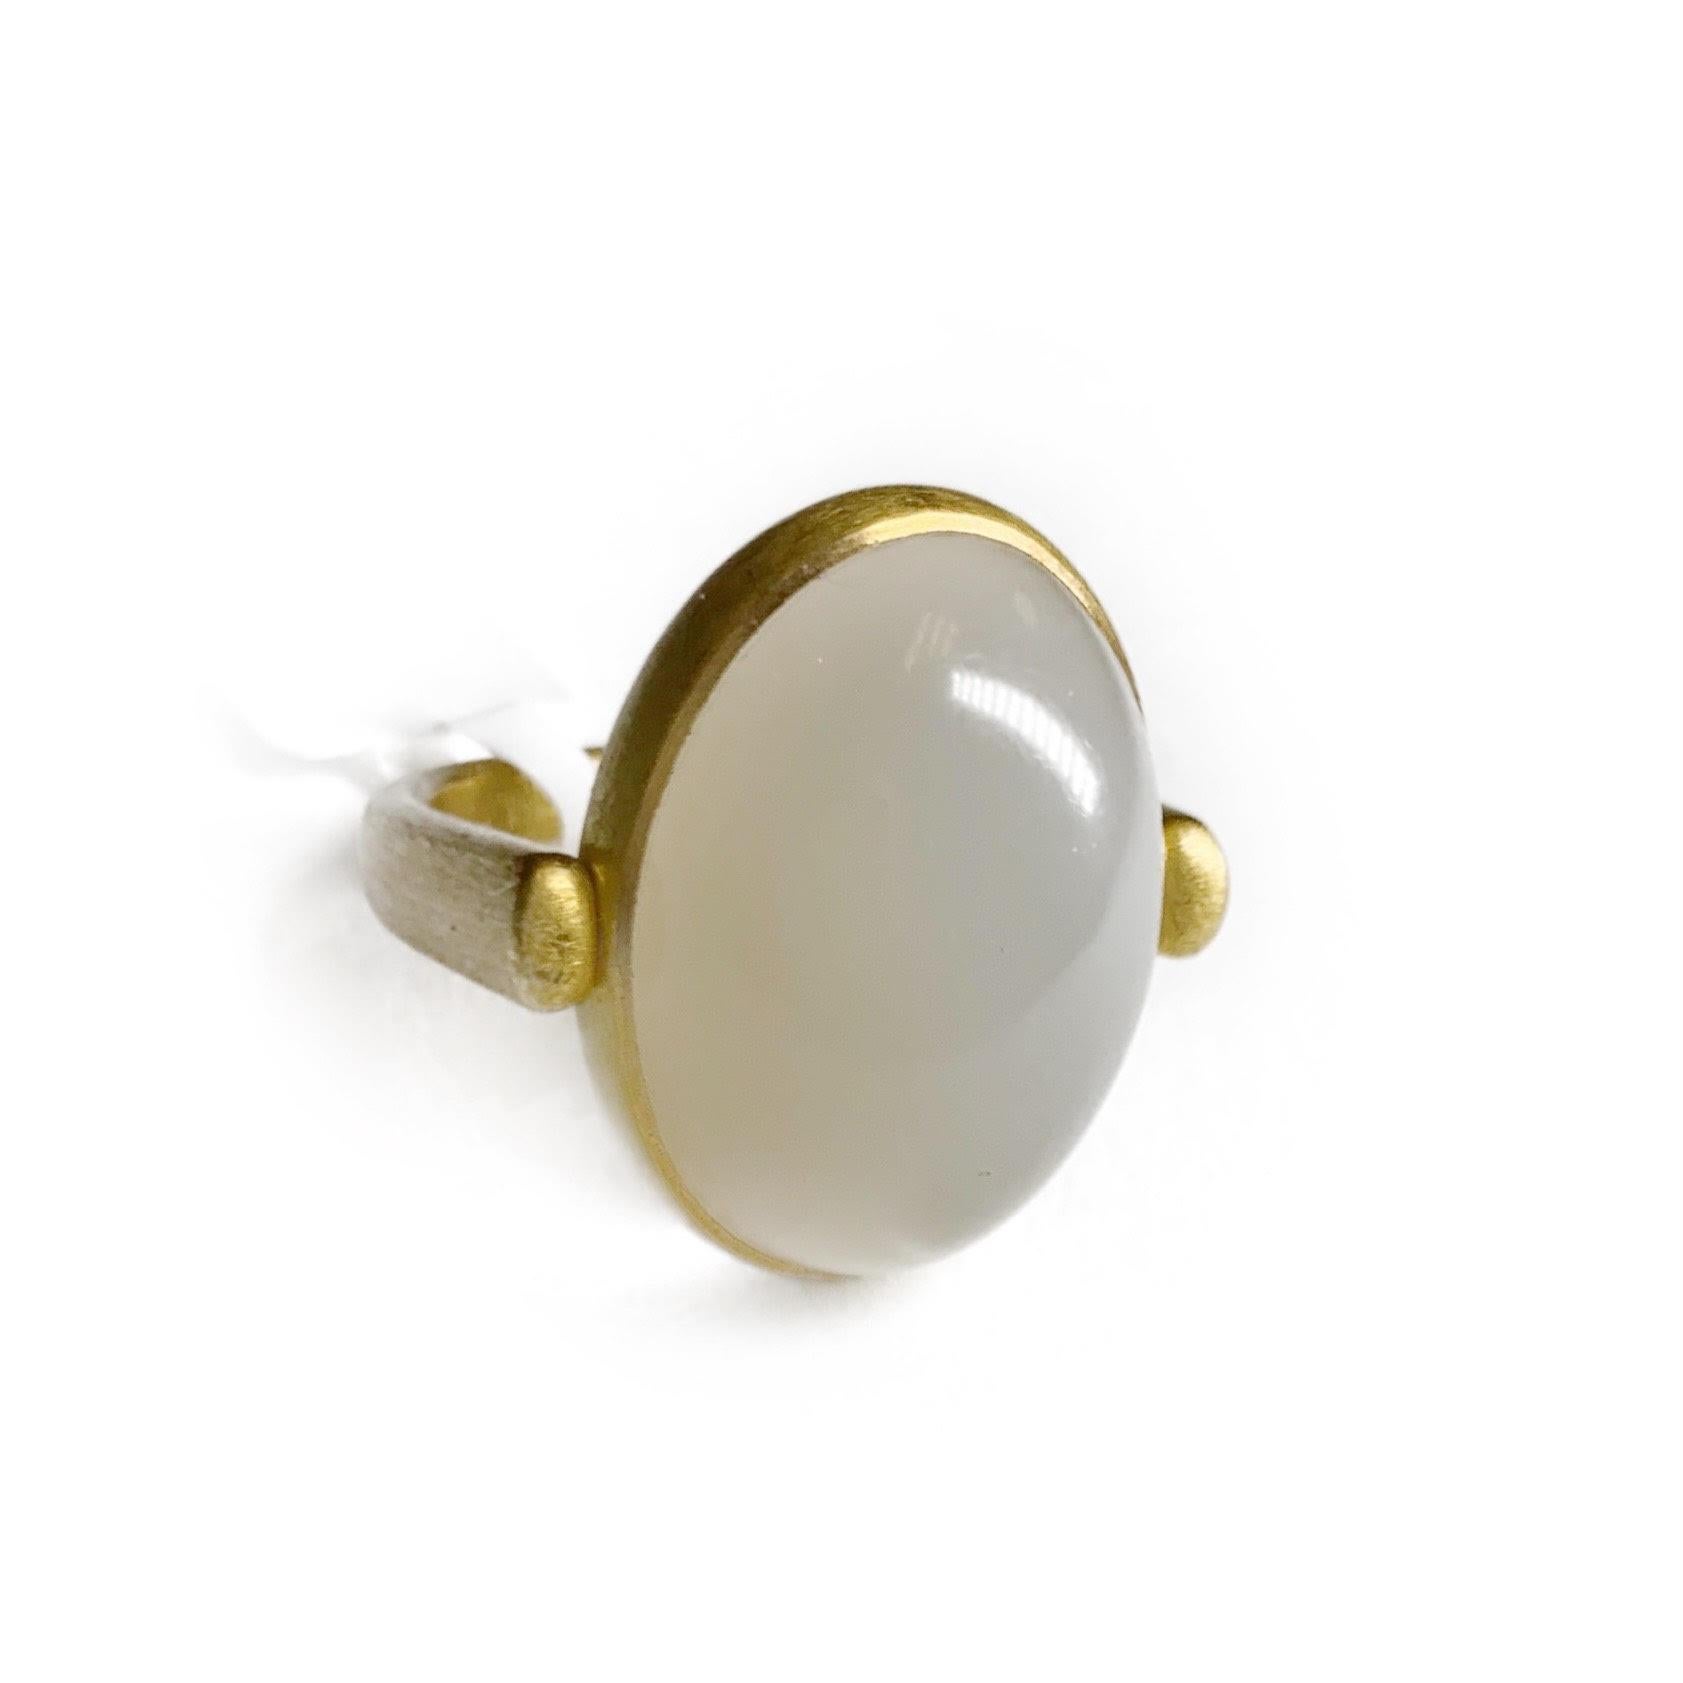 This stunning 23.55 carat moonstone cocktail ring is set in vibrant 22 karat yellow gold. The center stone is an elongated cabochon cut that swivels independently from the ring as a design feature. The gold is a soft satin finish adding to the